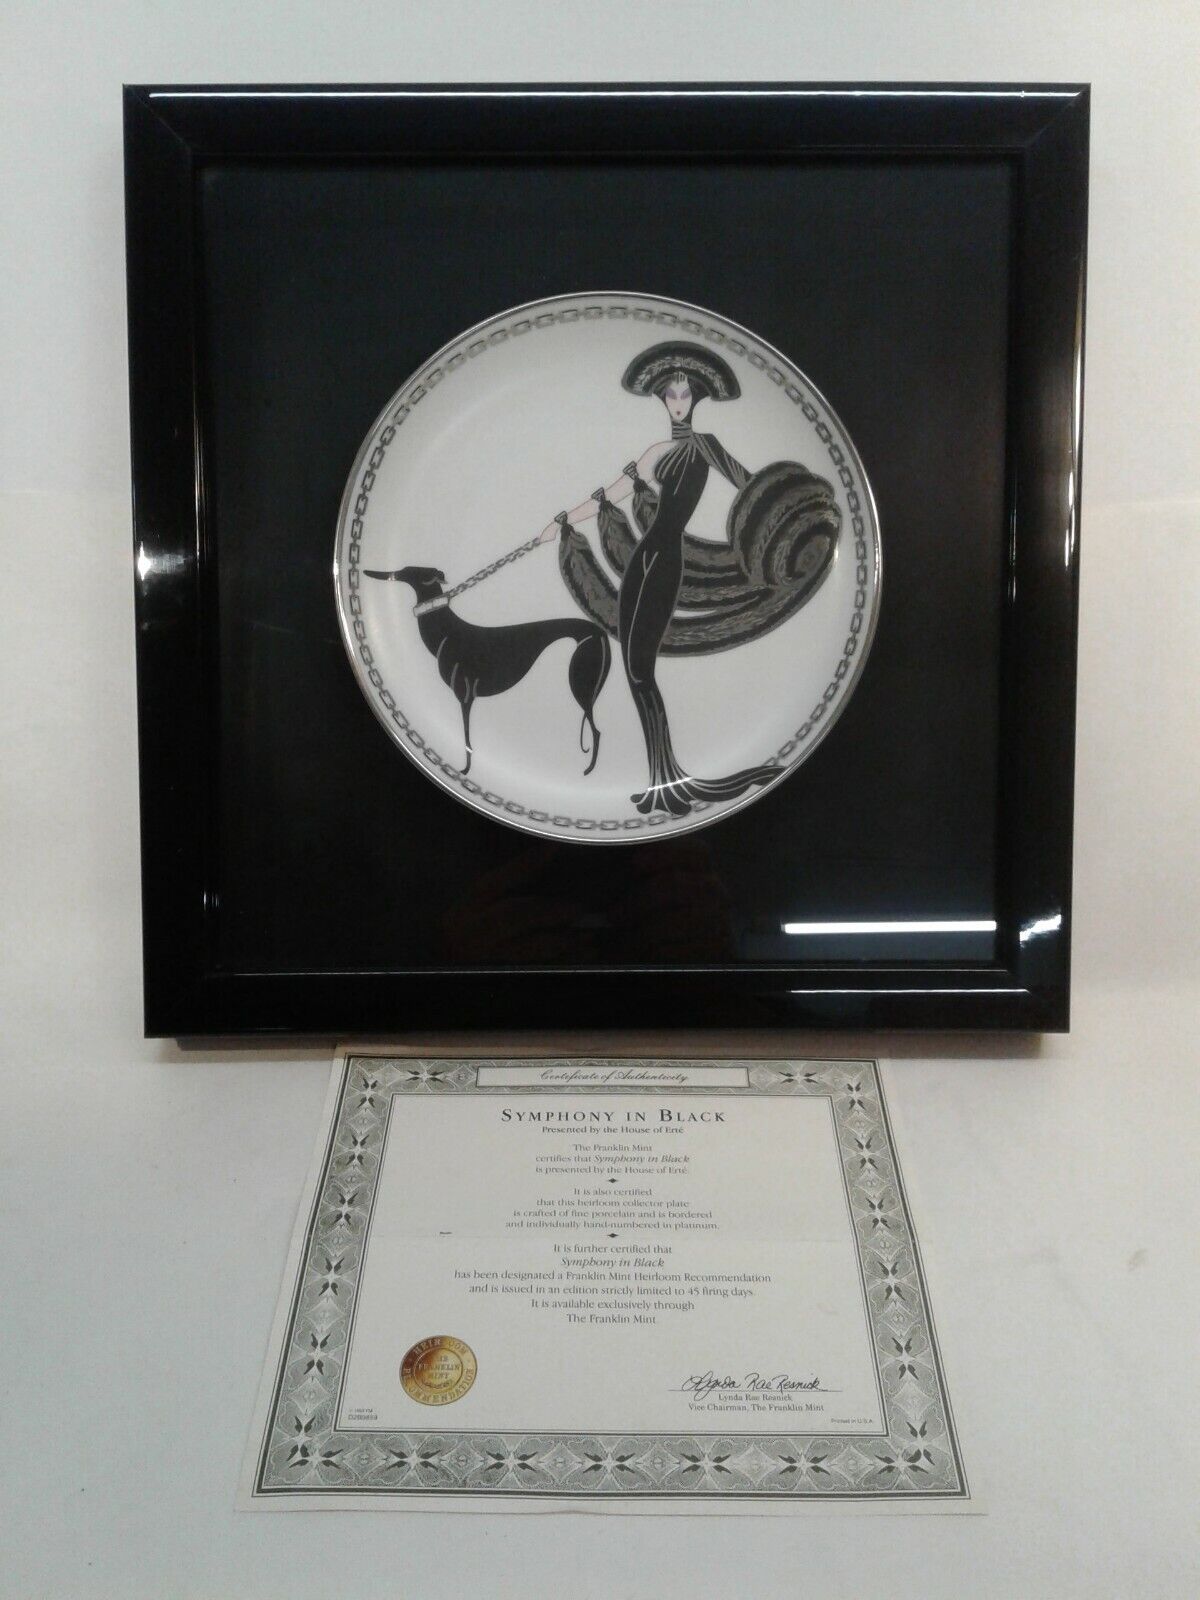 House Of Erte Symphony In Black Limited Edit. Framed Plate With Cert. of Authen.